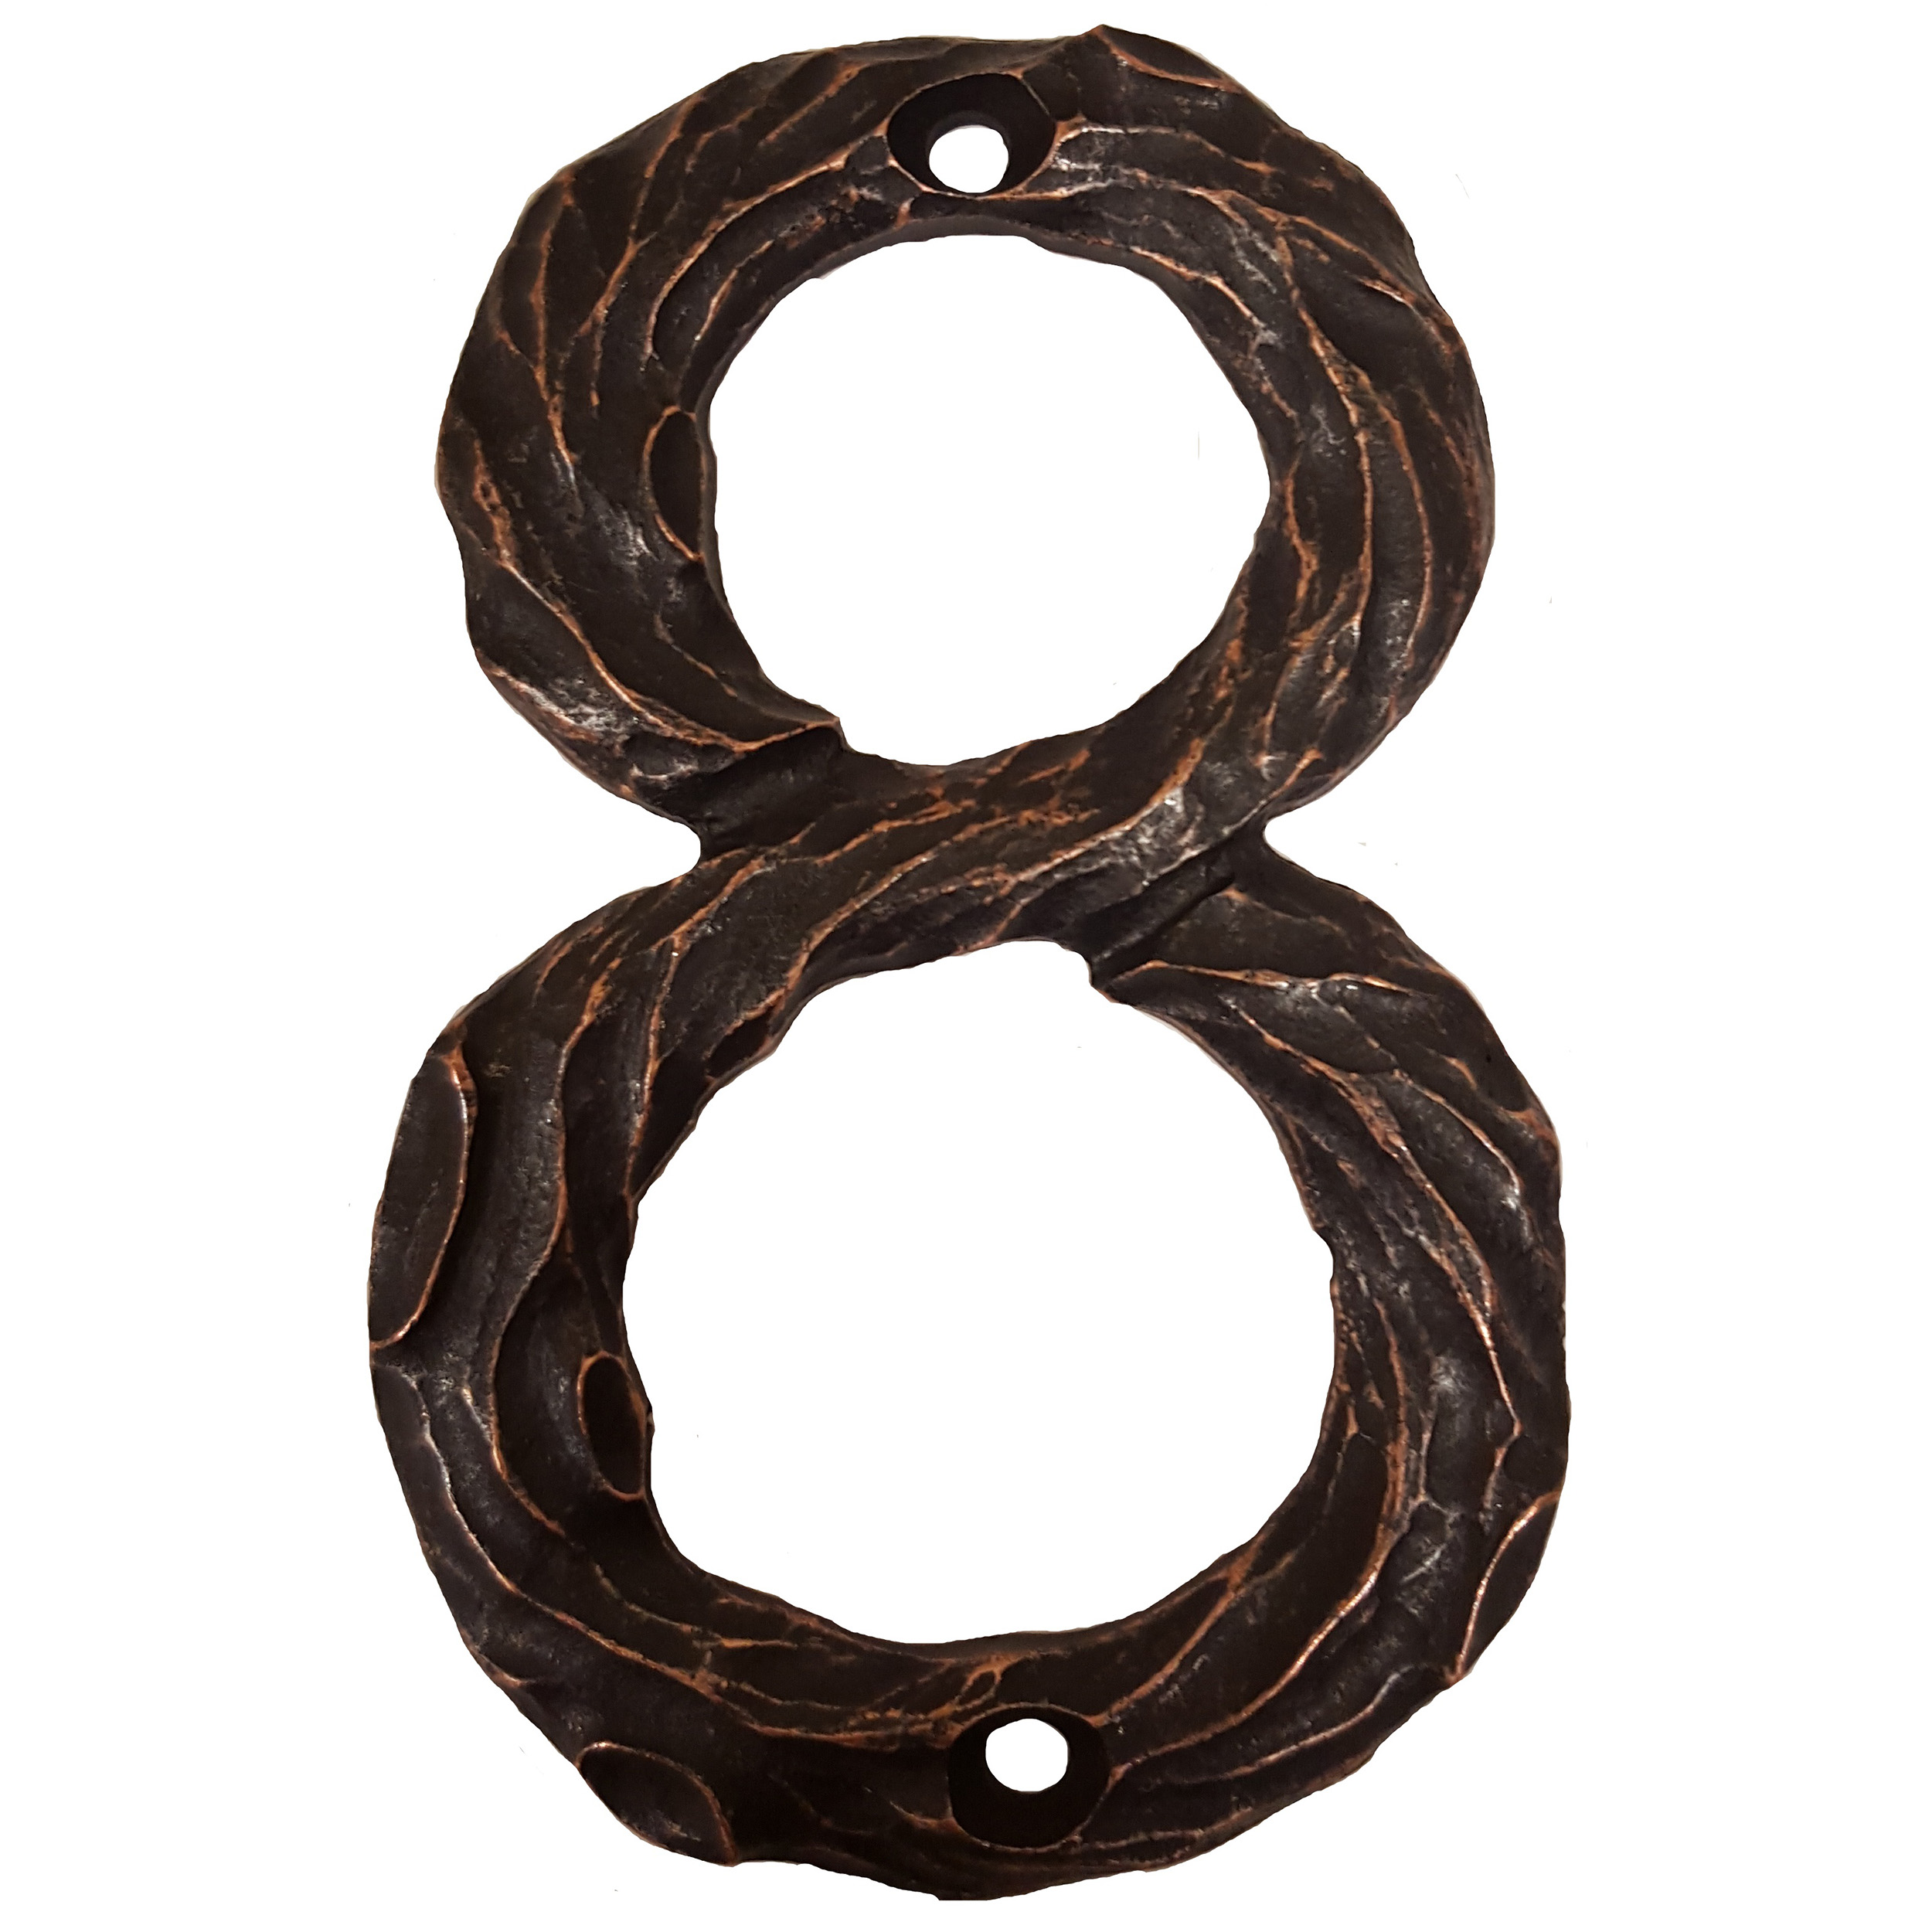 Lhn8-orb Log House Number 8, Oil Rubbed Bronze, 1 Piece